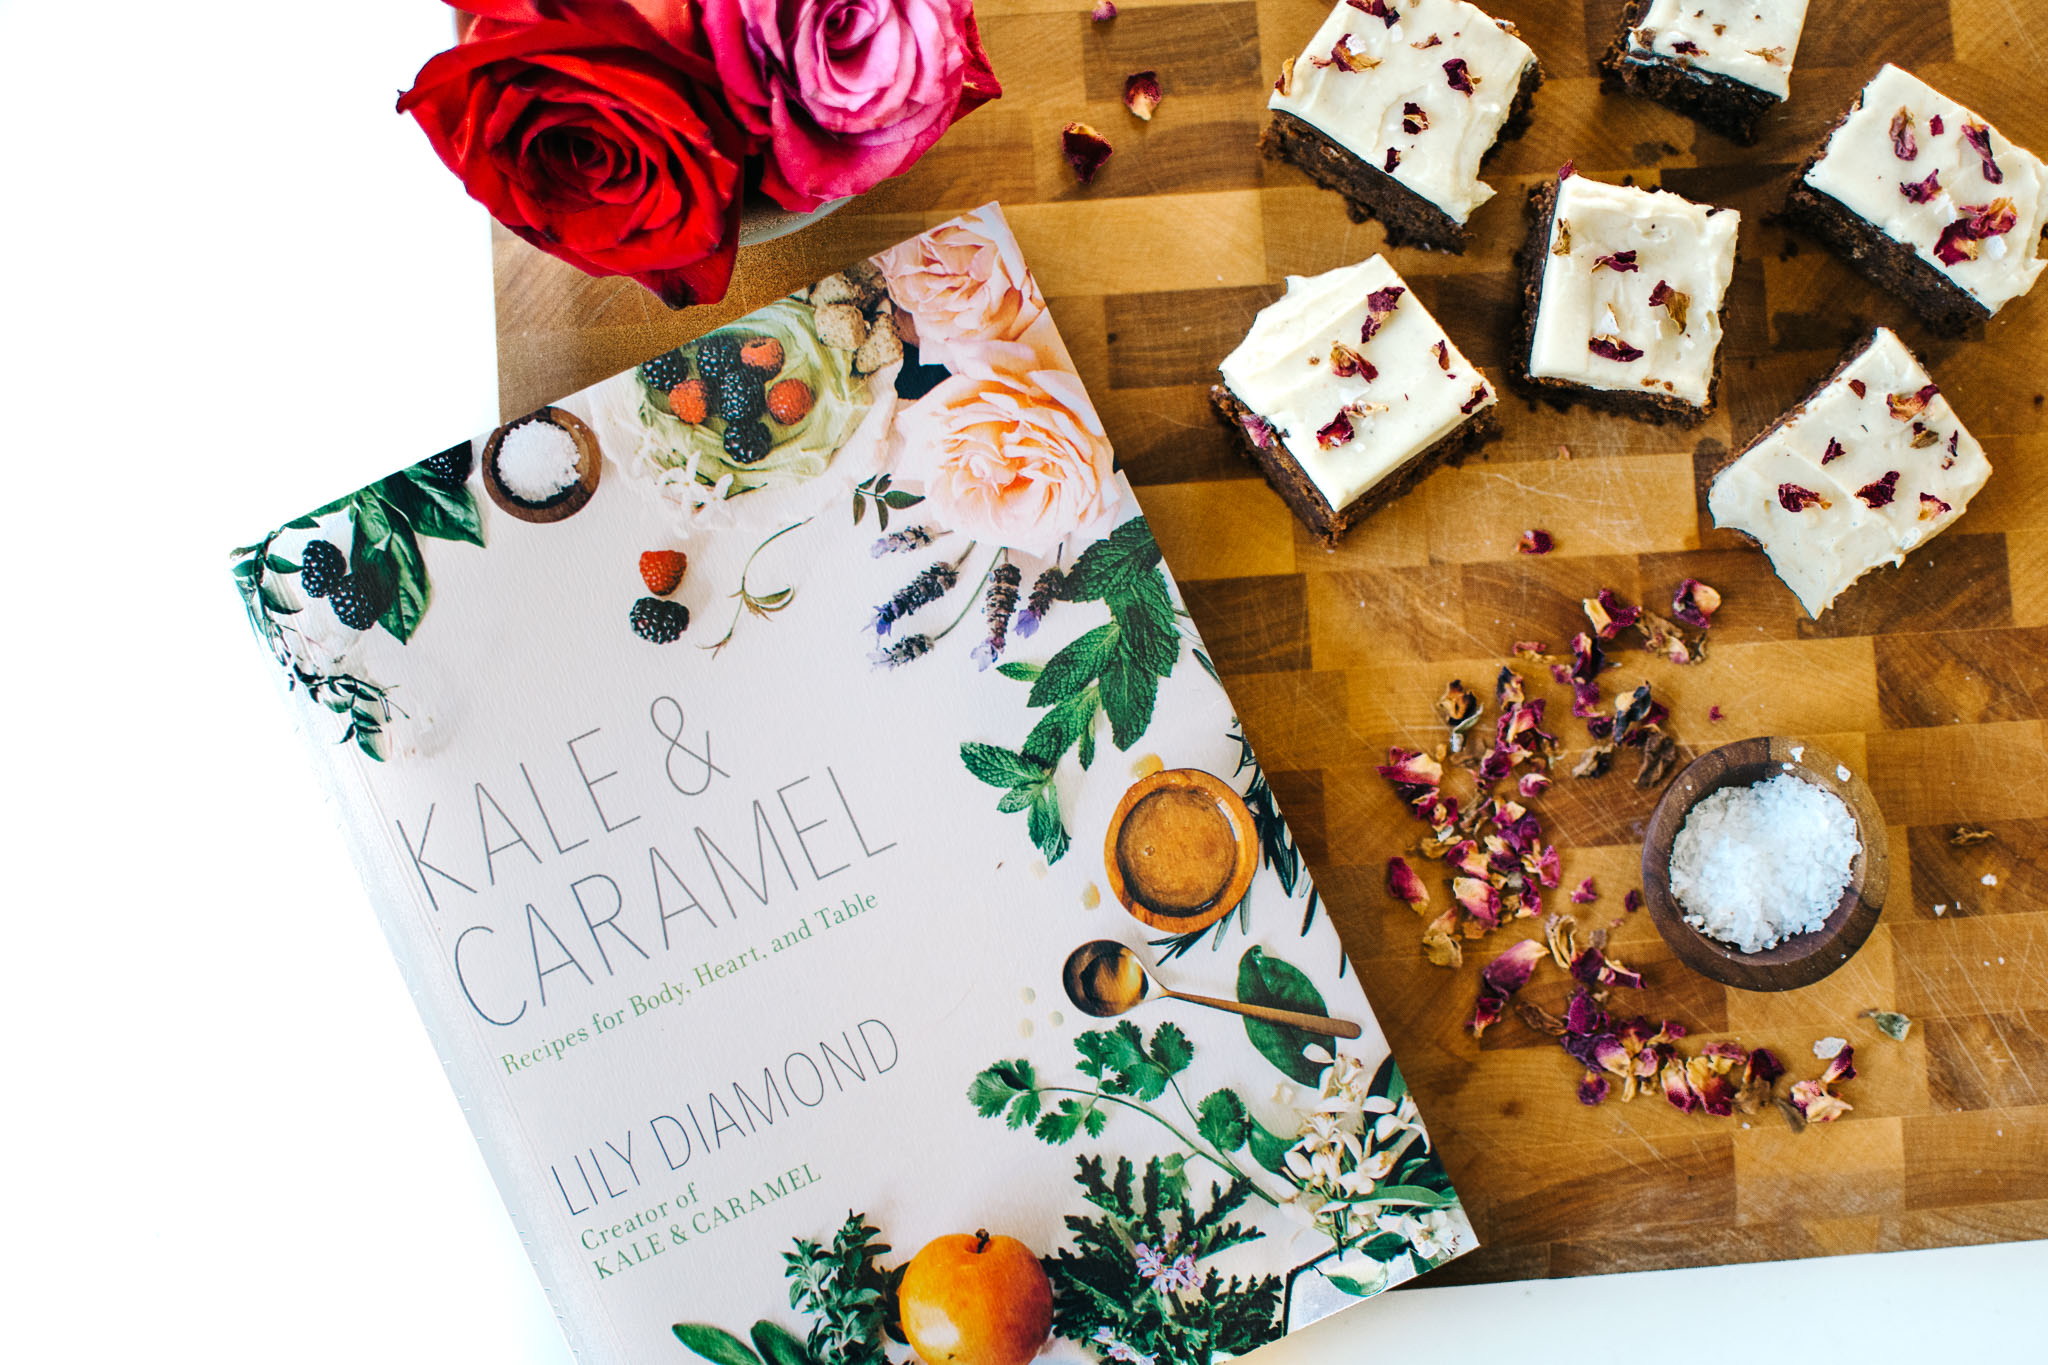 ROSEWATER BROWNIES WITH CARDAMOM TAHINI FROSTING + A COOKBOOK PREVIEW.